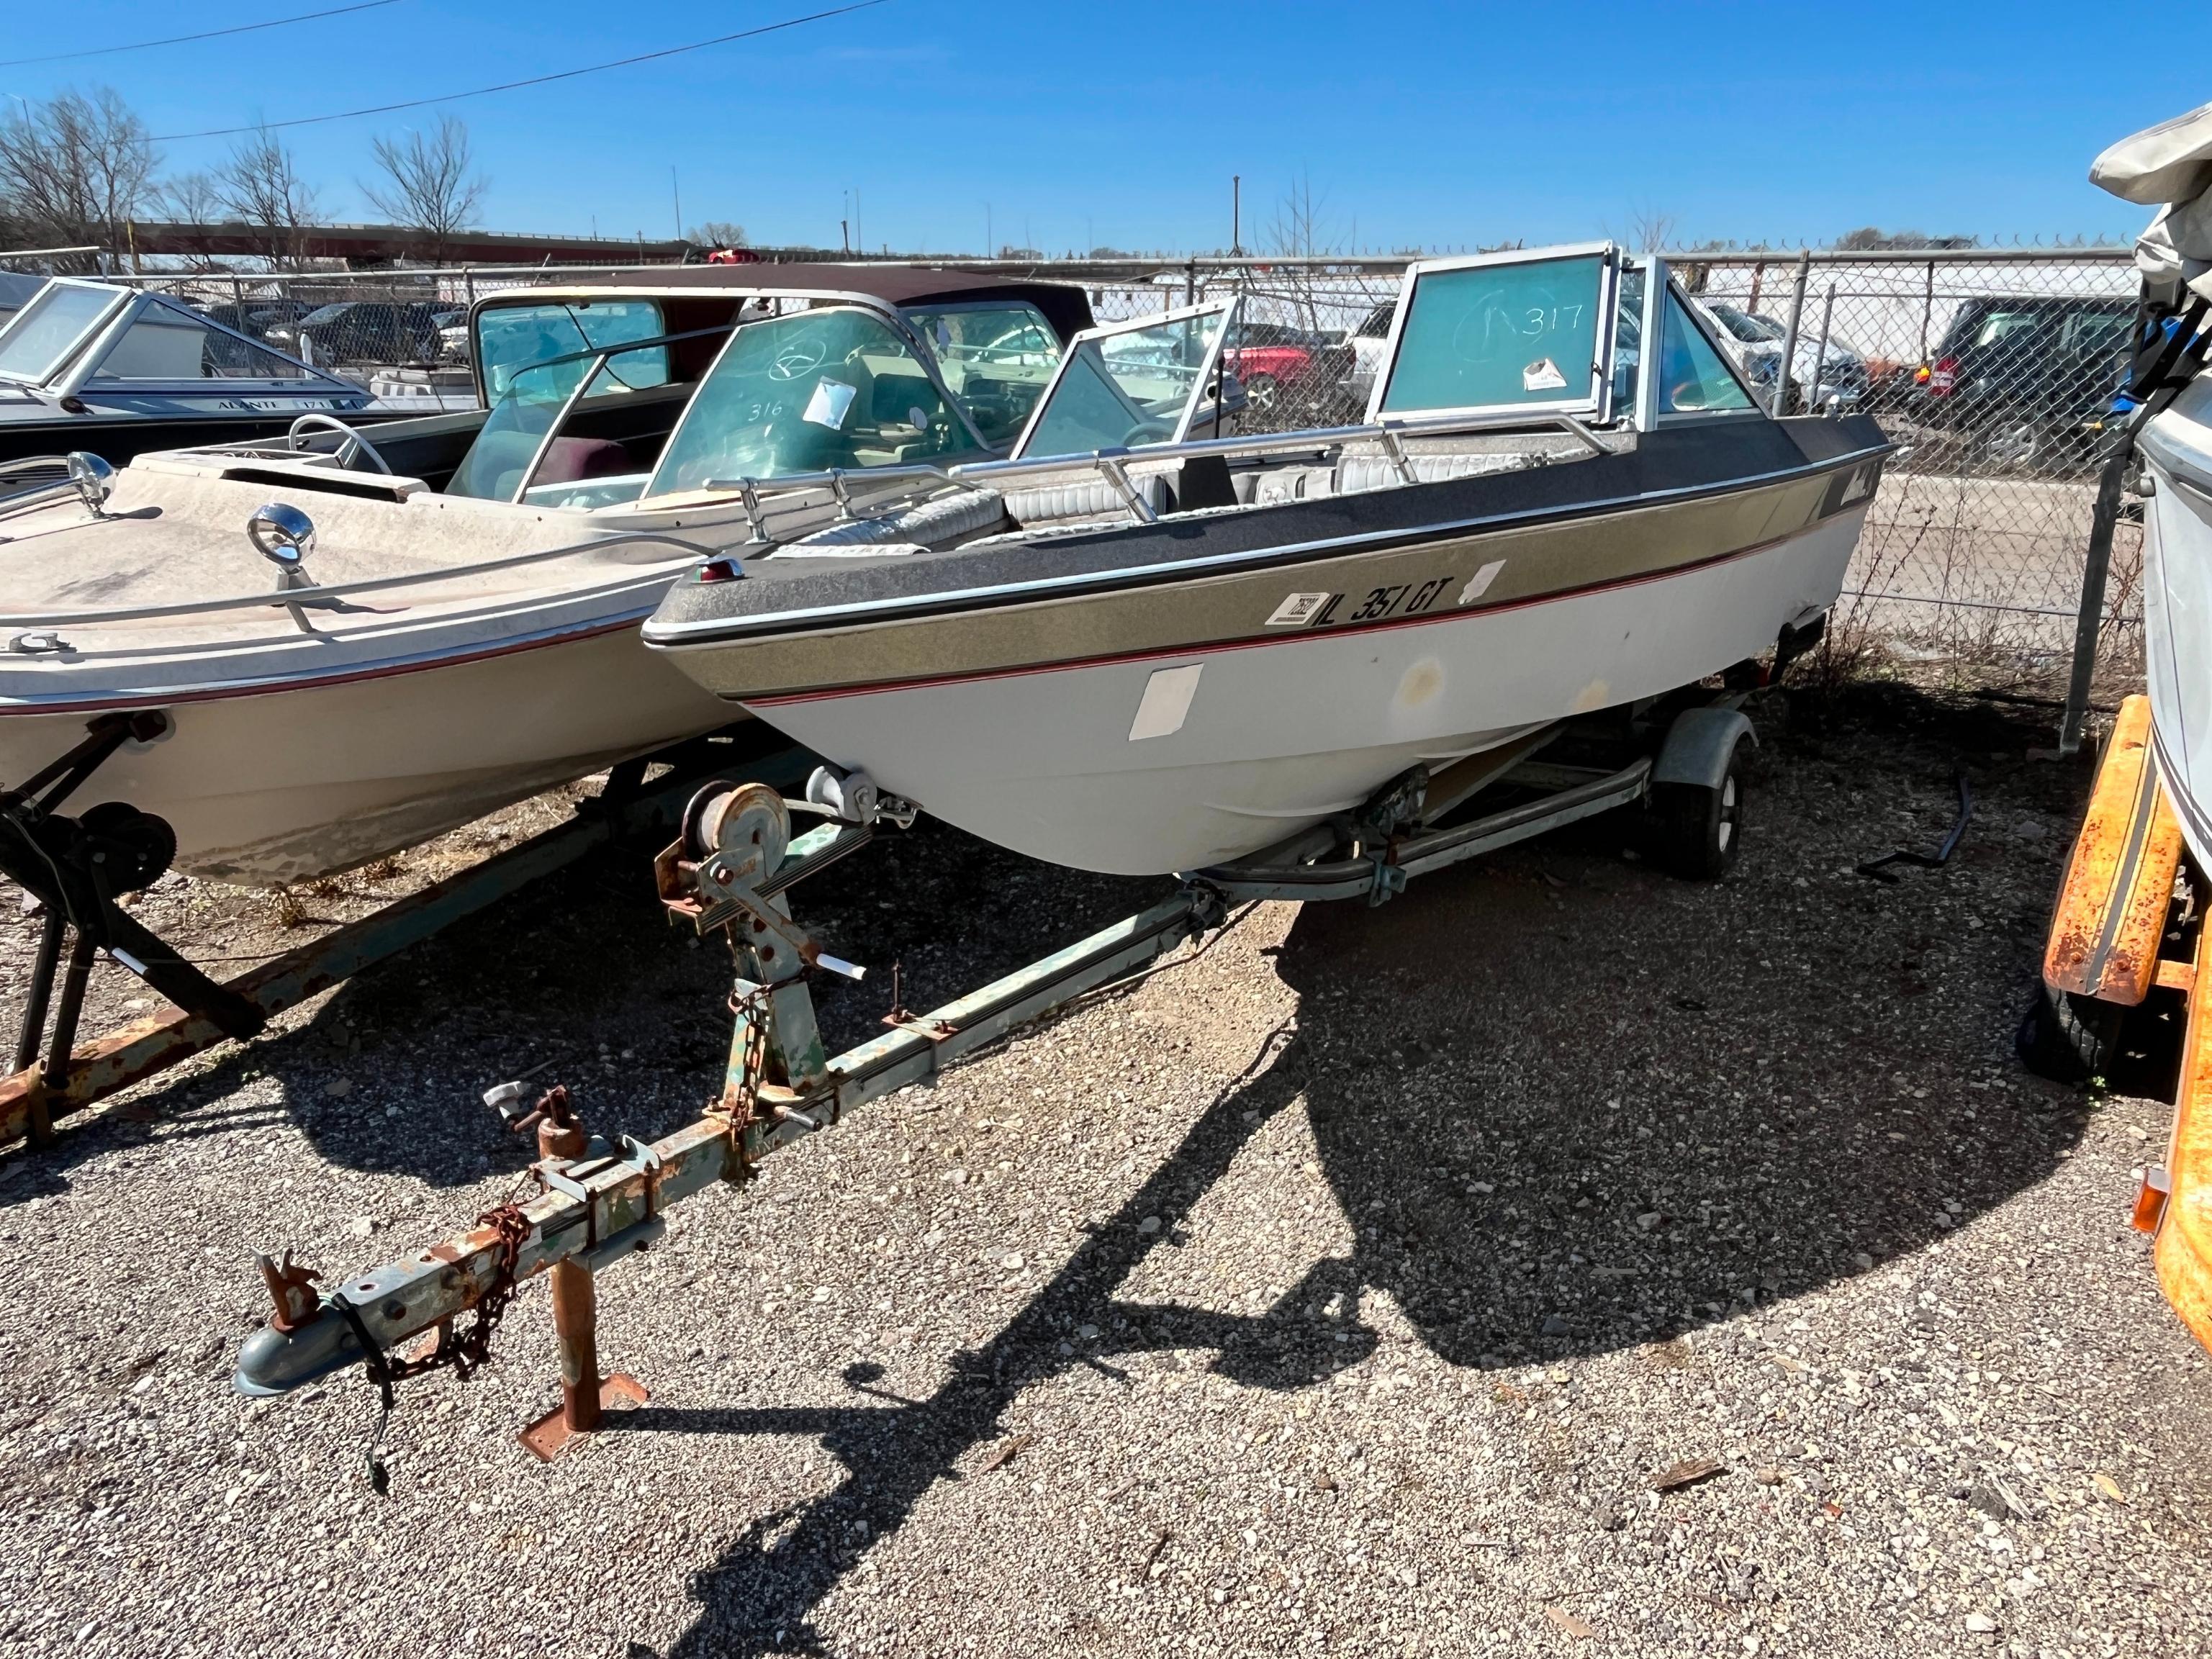 CHEETAH BOAT VN:N/A WITH OUTBOATD MOTOR, S/A TRAILER, PARTS...No title, Sells Bill of Sale Only.